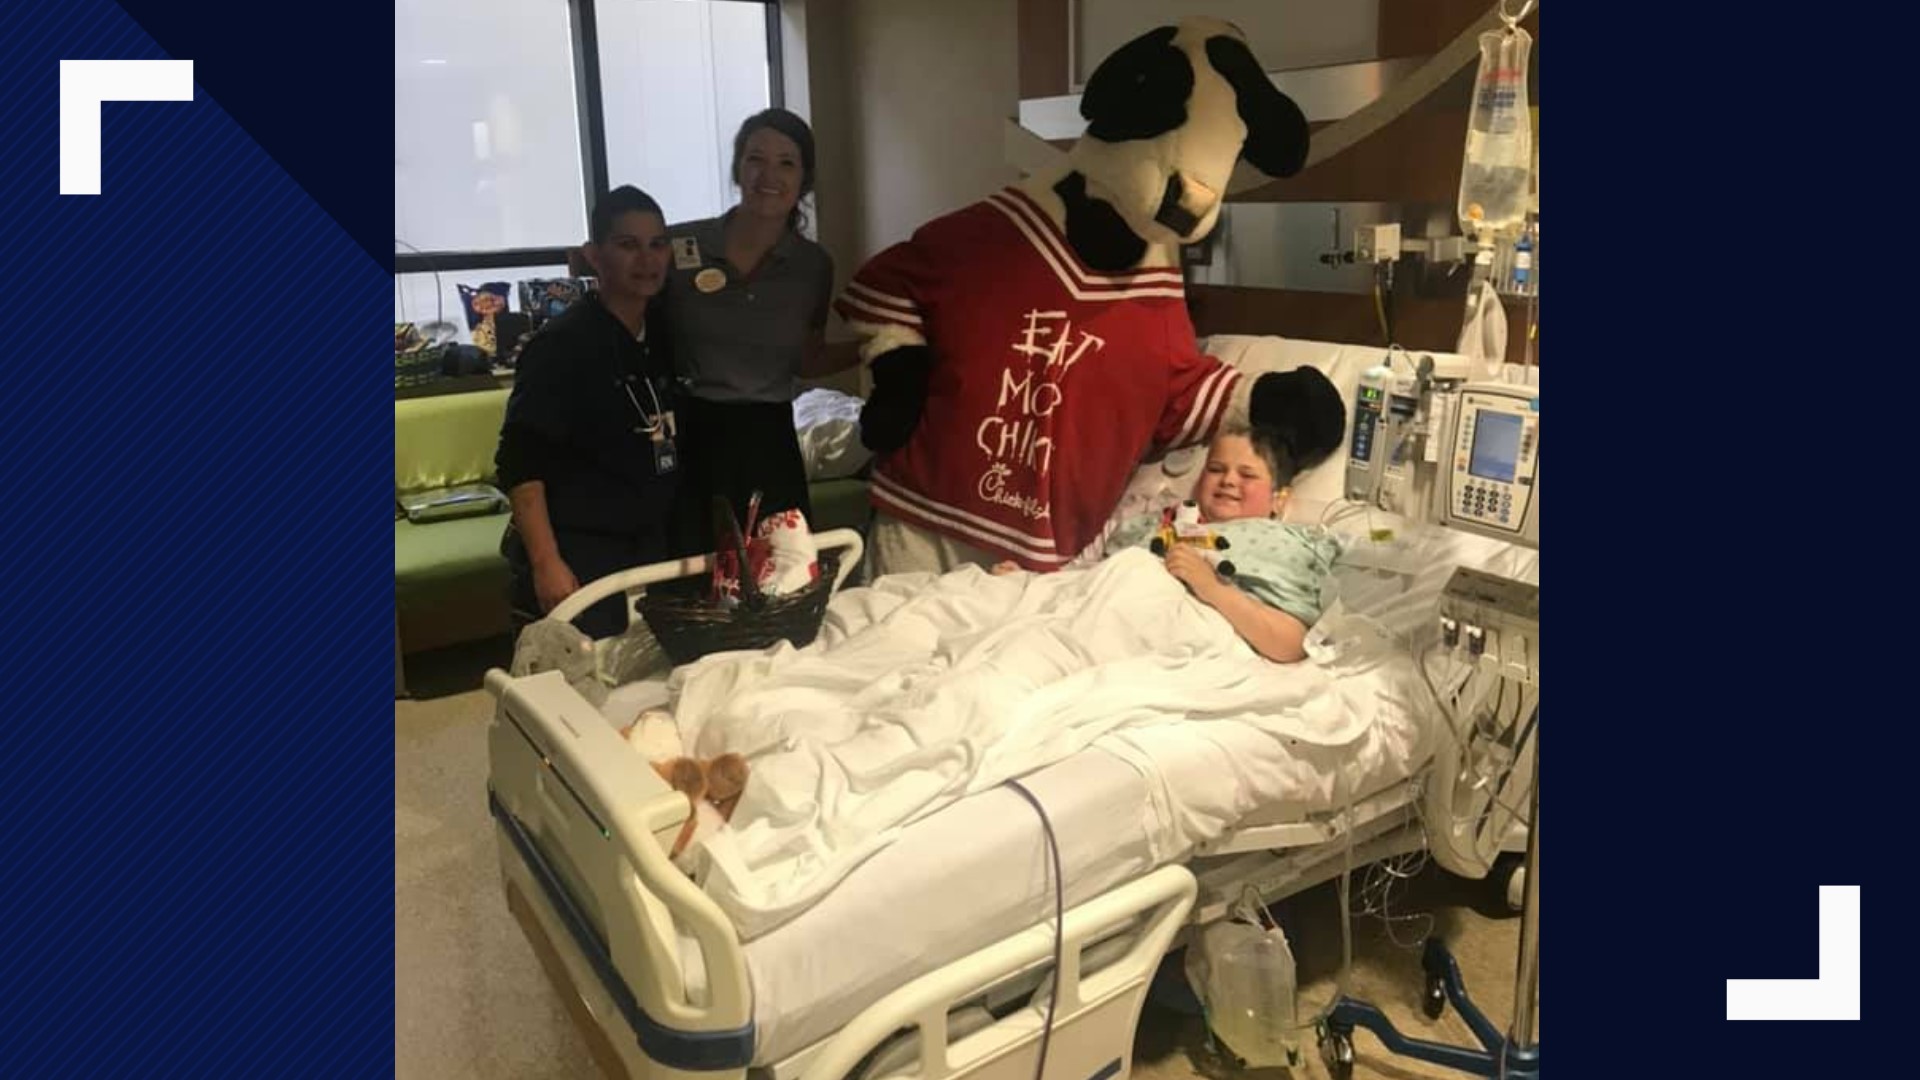 Danny Agee is a bowtie connoisseur, future presidential candidate and a Chick-fil-A fanatic. His family found out he had a brain tumor on Saturday. By Thursday, he was back home recovering.